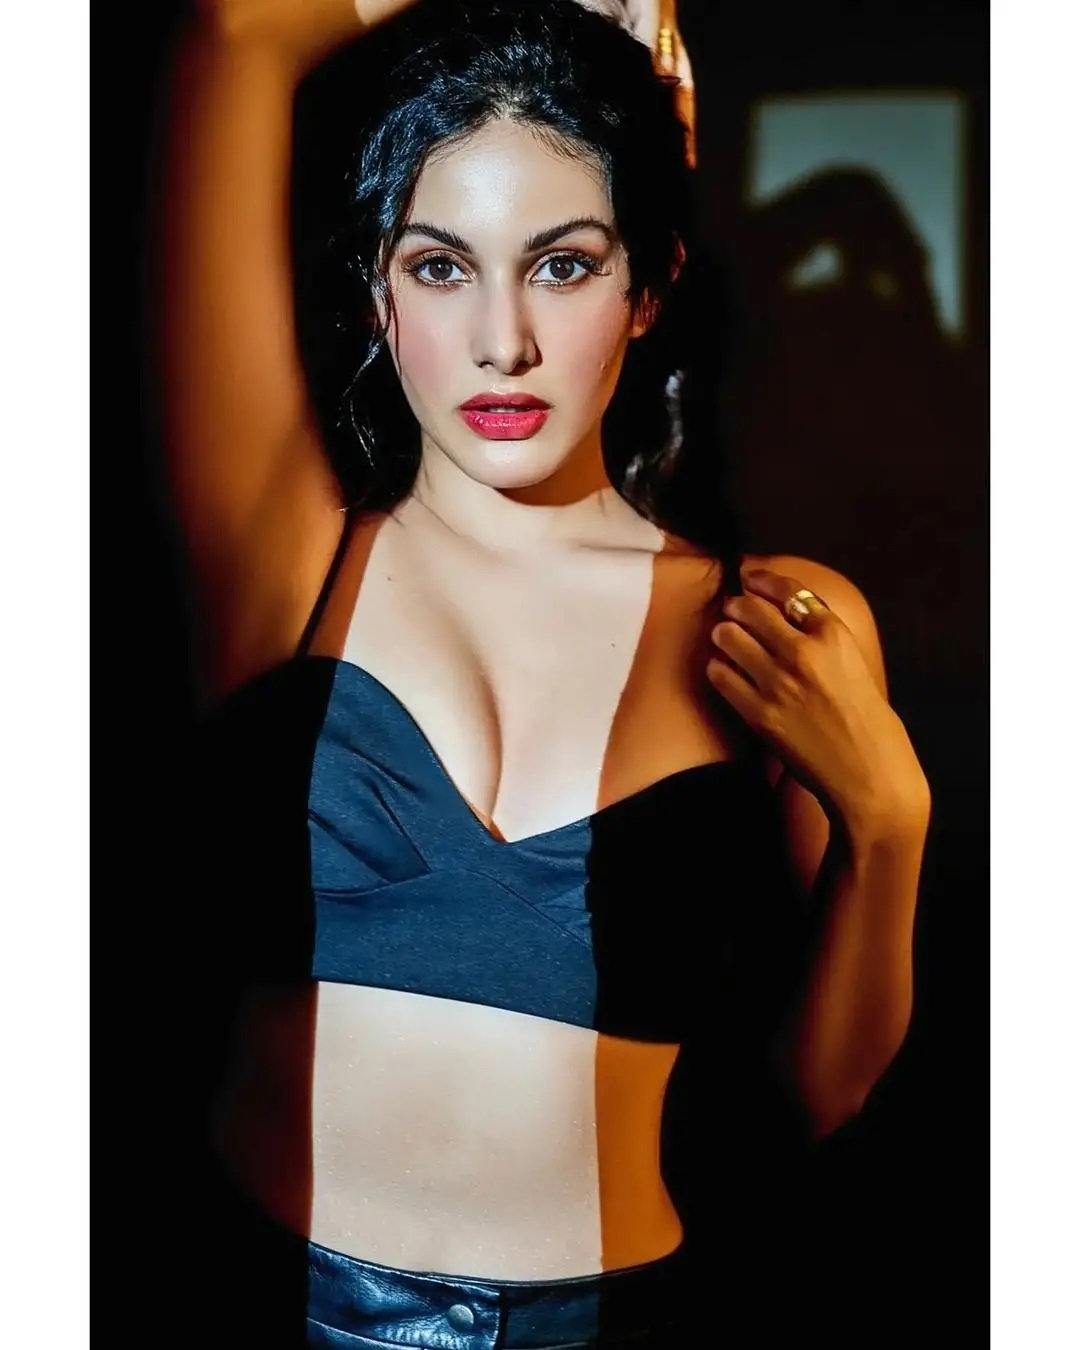 Amyra Dastur Hot Photos In Black Out Fit